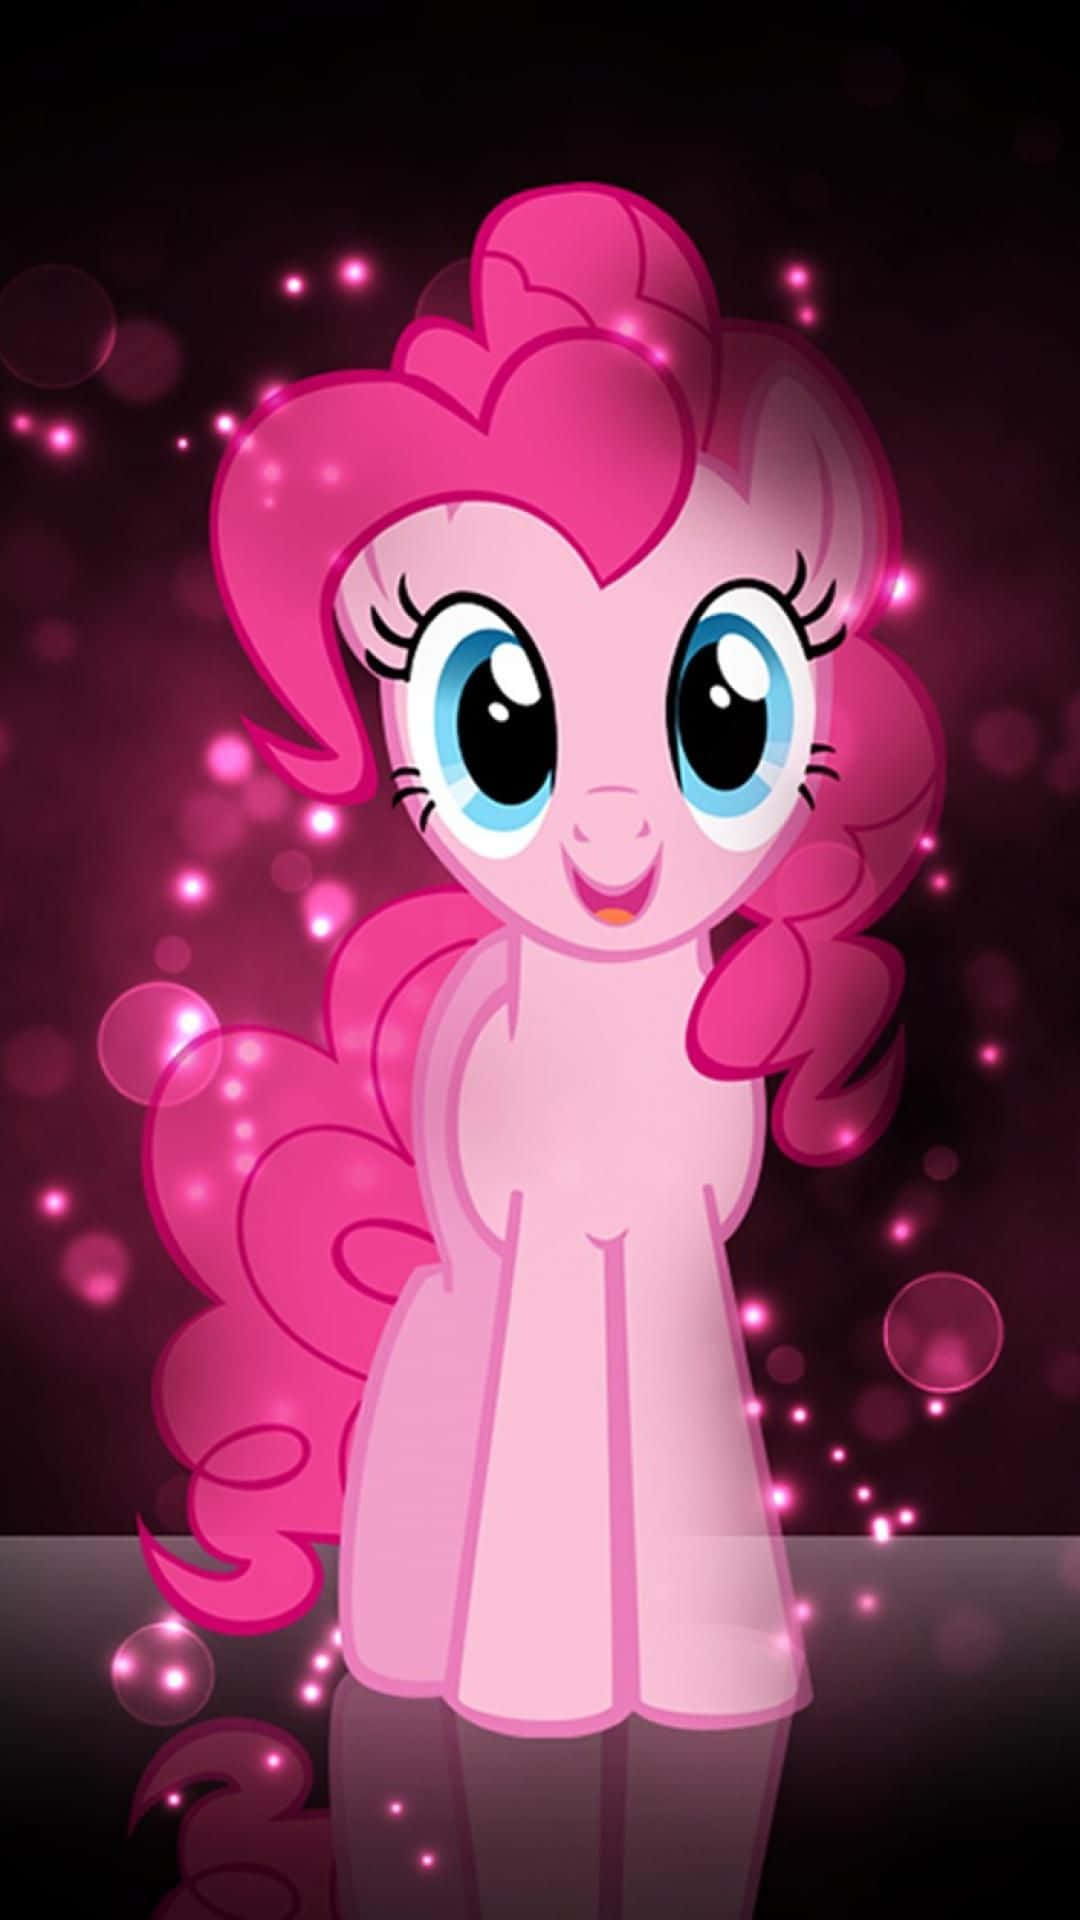 Have a Fun-Filled Day with Pinkie Pie!